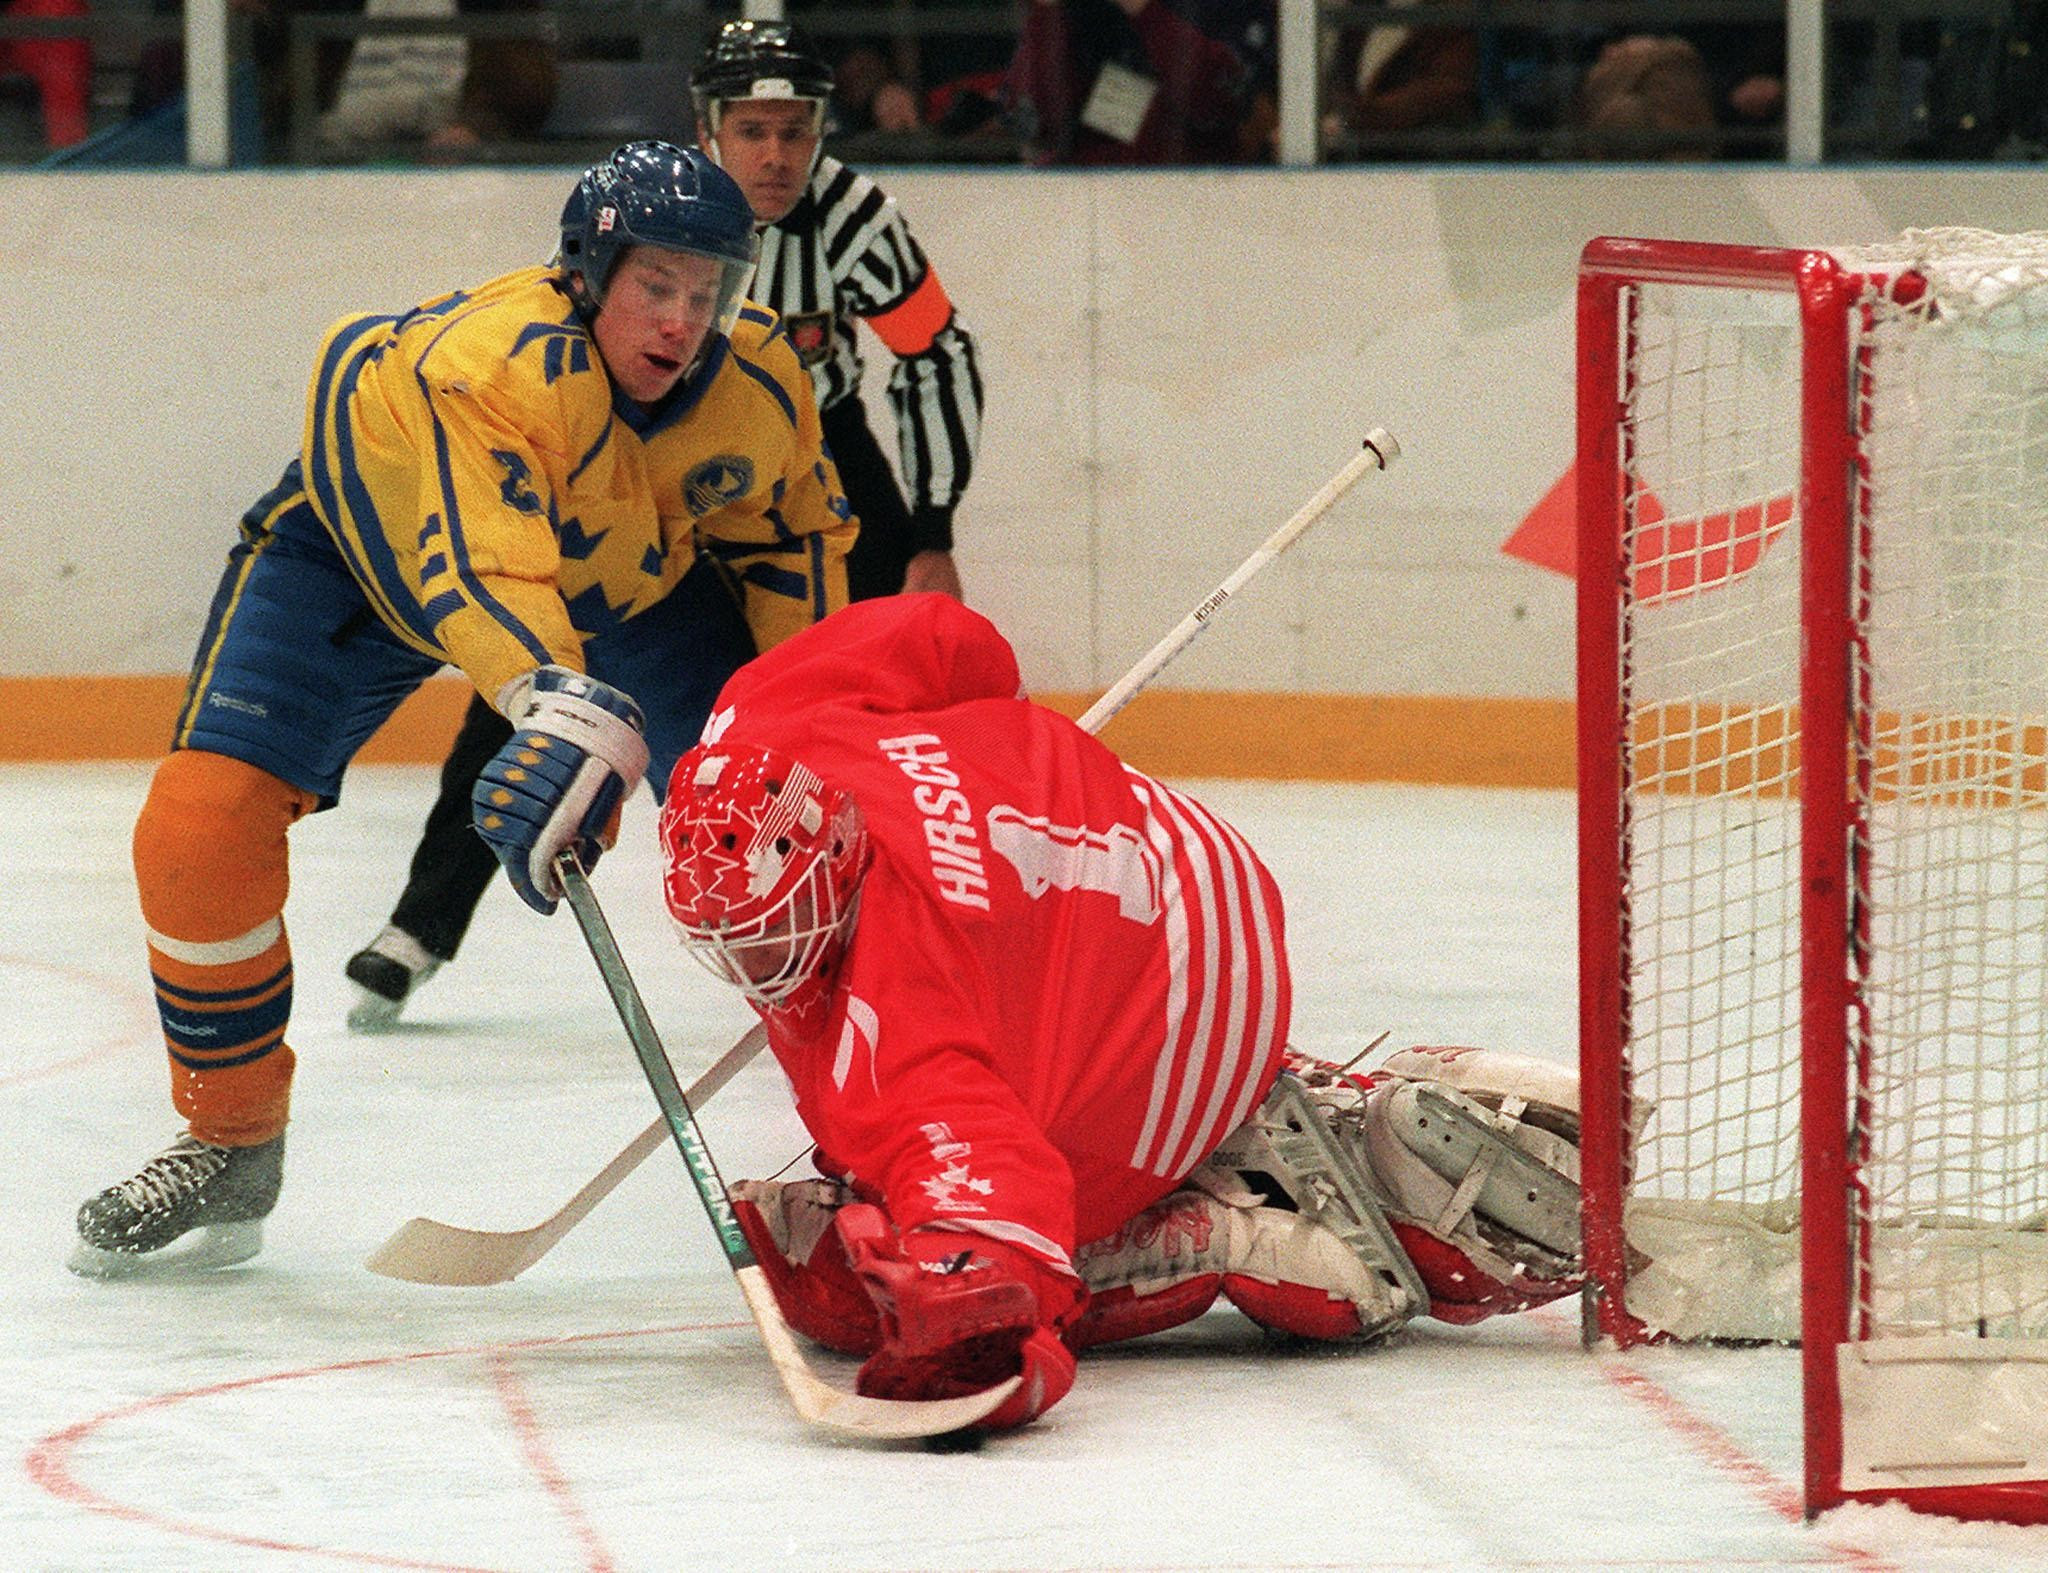 Lillehammer 1994 was the last Olympic men's ice hockey competition with no NHL participation ©Getty Images